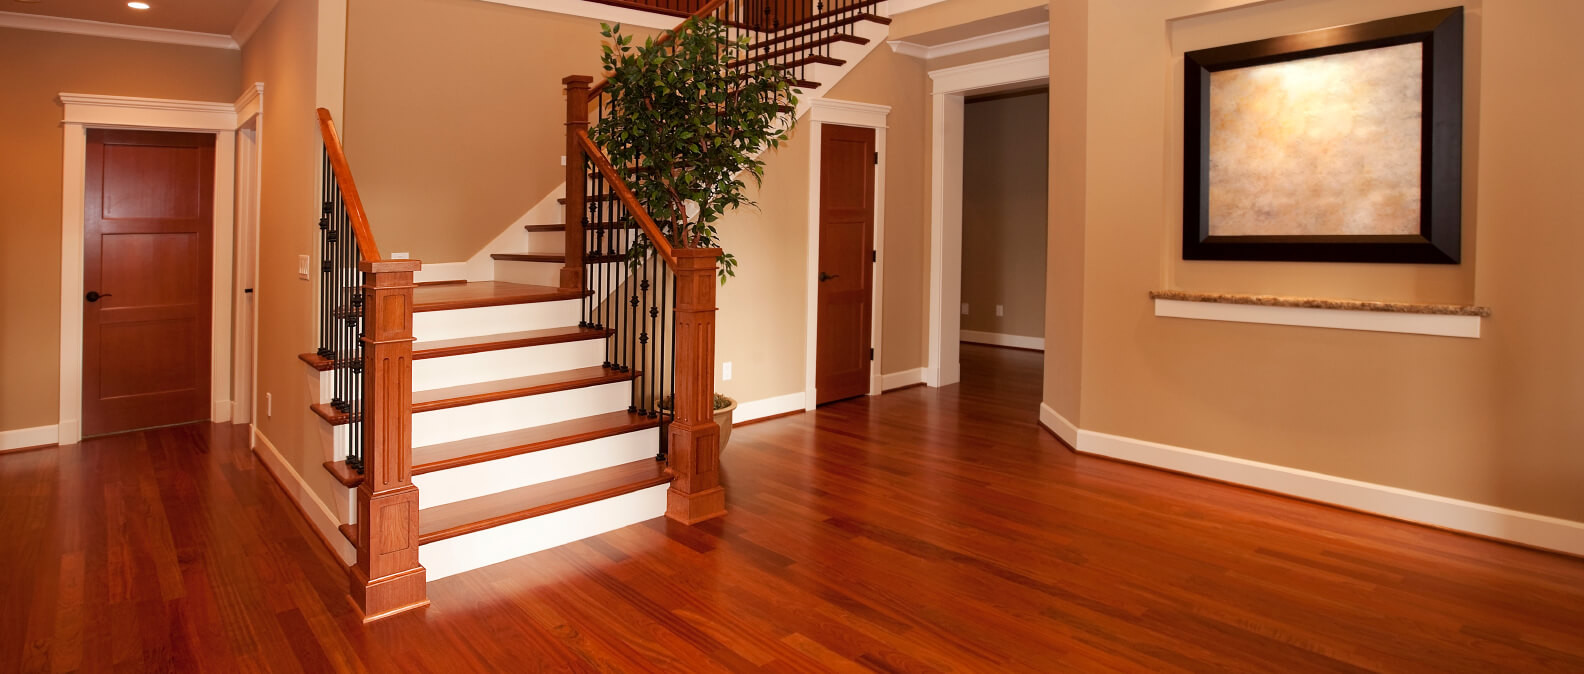 19 Awesome Costco Hardwood Flooring Cost 2024 free download costco hardwood flooring cost of breathtaking hardwood flooring pictures beautiful floors are here only pertaining to breathtaking hardwood flooring picture floor installation laminate milto